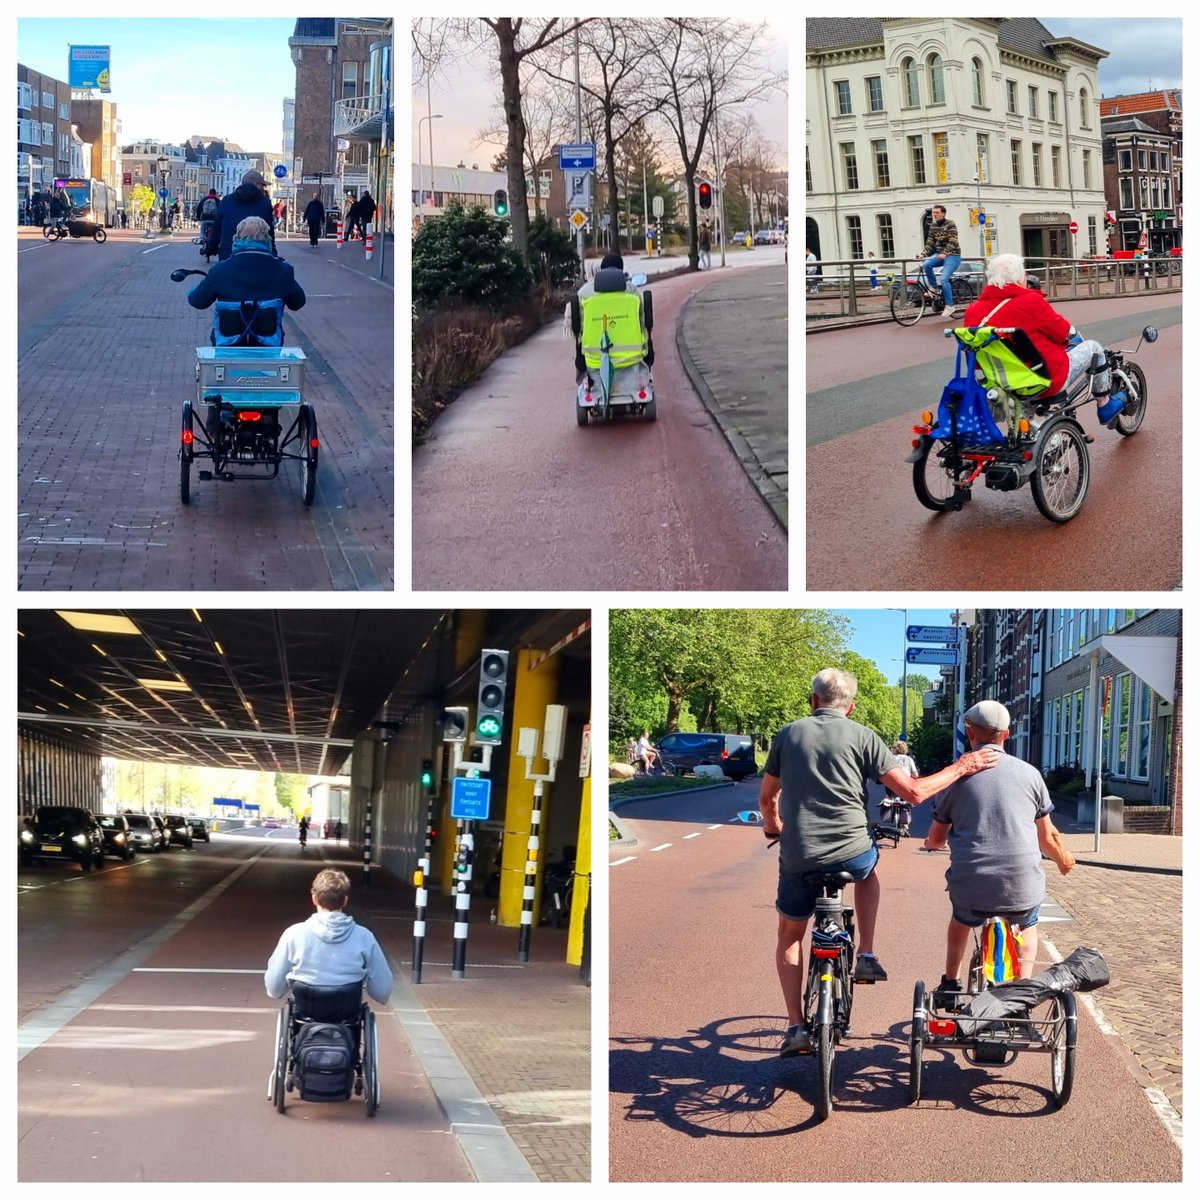 'the people who aren't able to use bikes' That's not a valid point at all, because most people ARE able to use bikes. If not a normal bike, then a modified one or any other special needs vehicle. It is (the lack of) safe infrastructure Americans should grumble about!